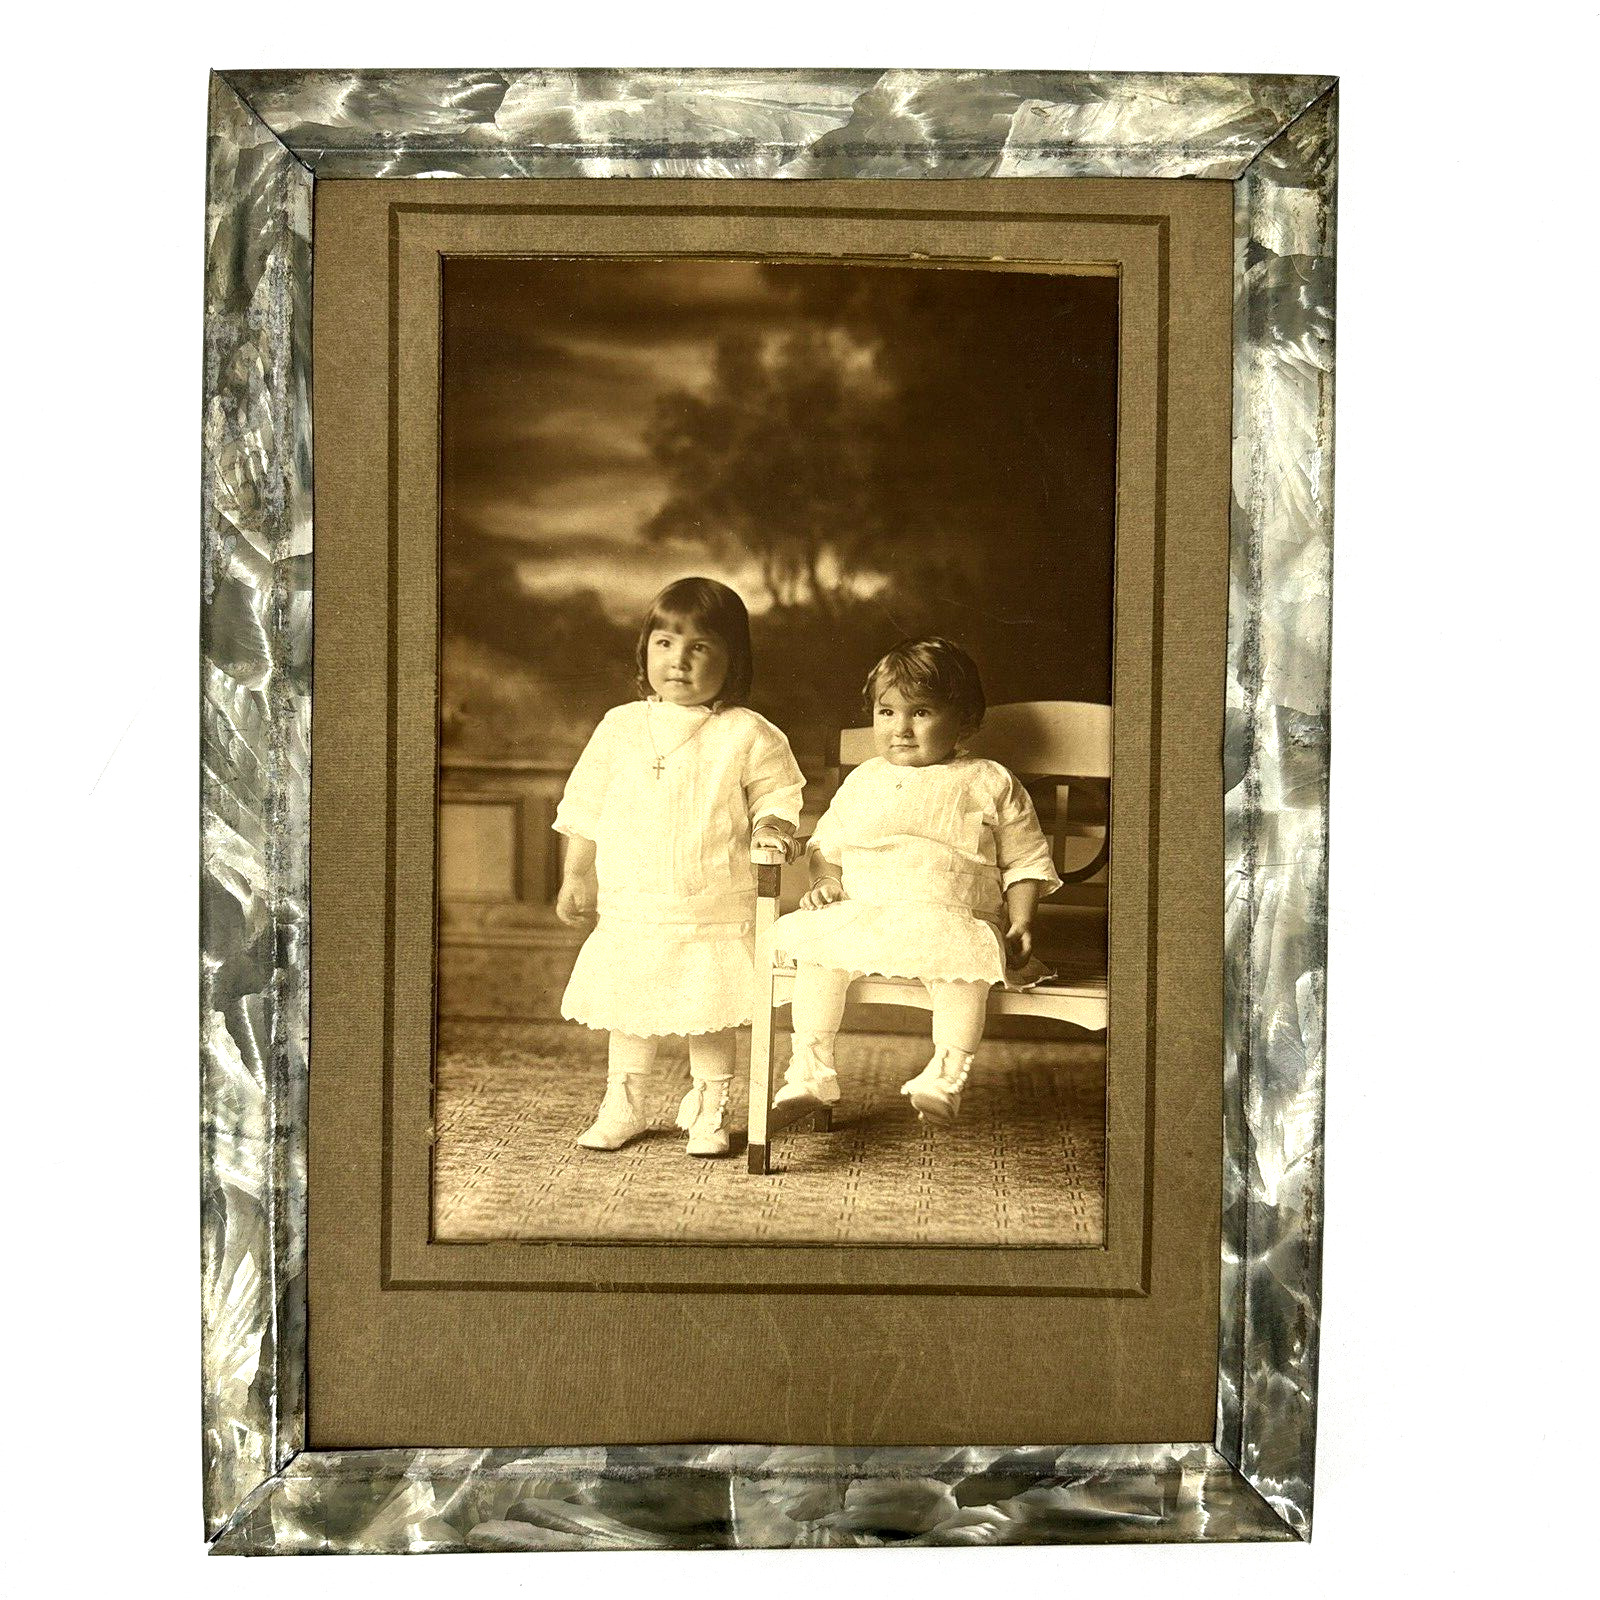 Antique Sepia Tone Portrait Photo 2 Baby Girls Family Sisters Framed 1910s 20s